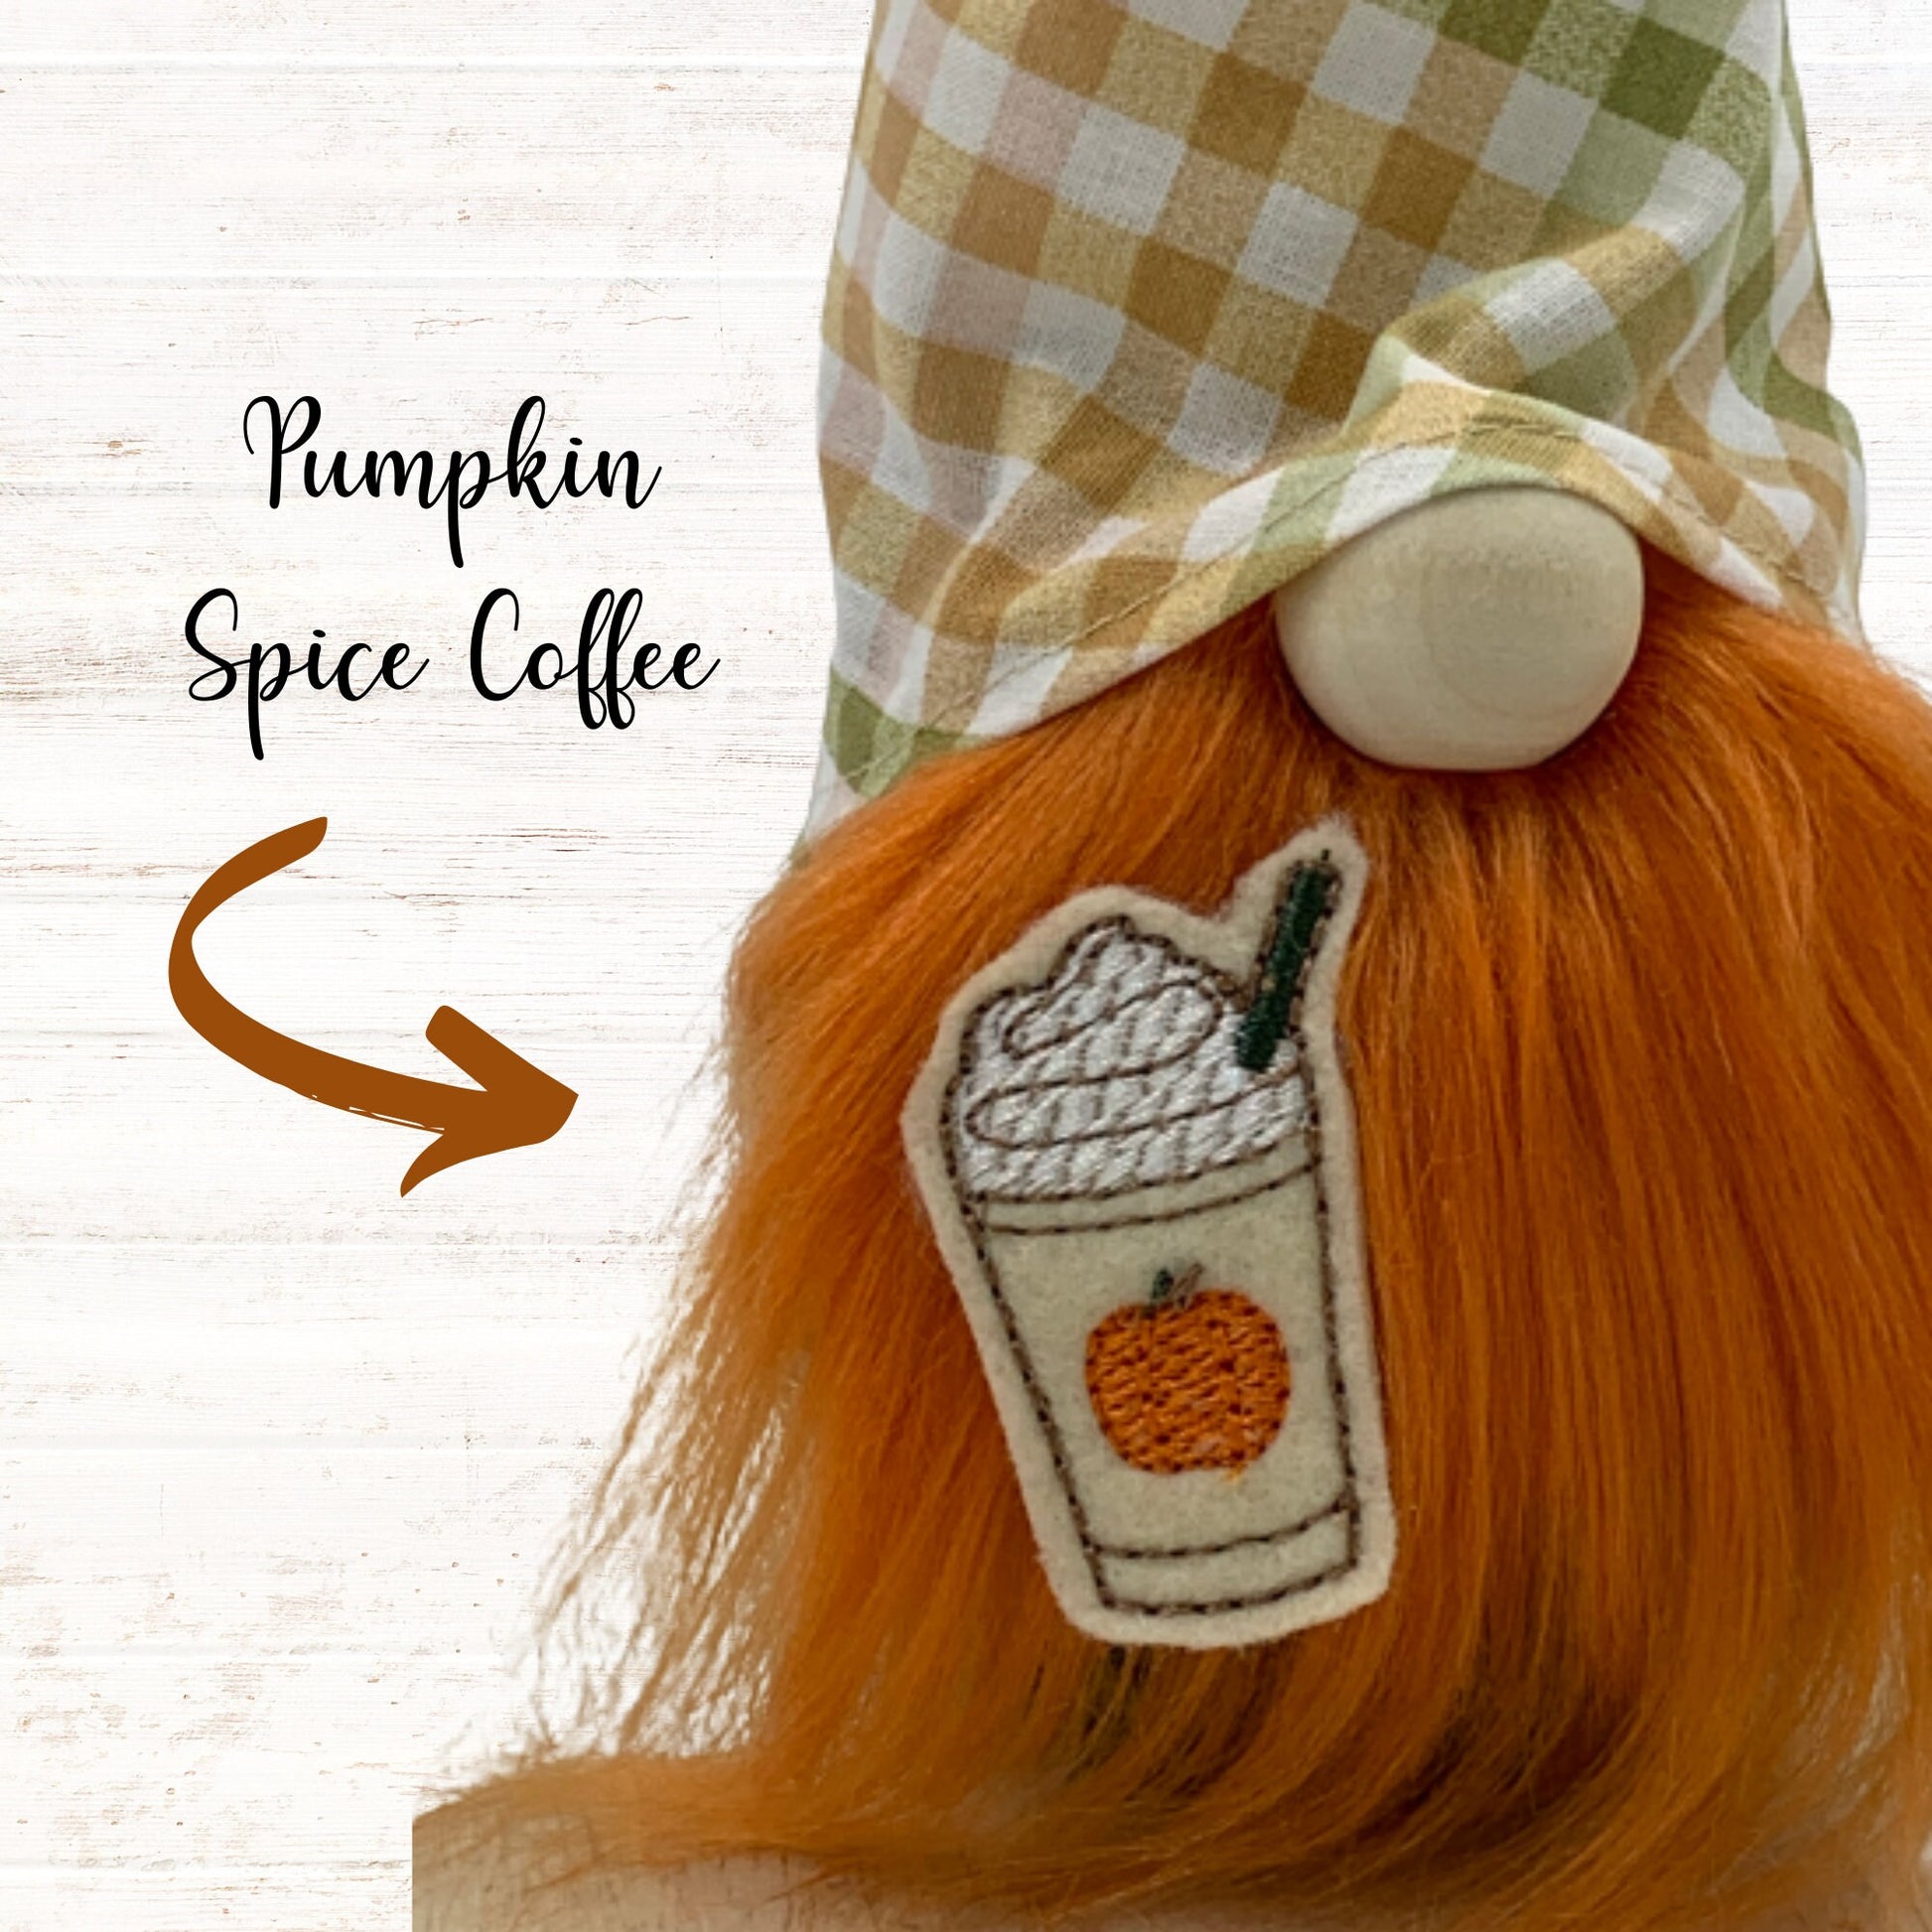 Pumpkin Spice Coffee Gnome / Ginger Autumn Tiered Tray Decor / Fall Gnome Decorations